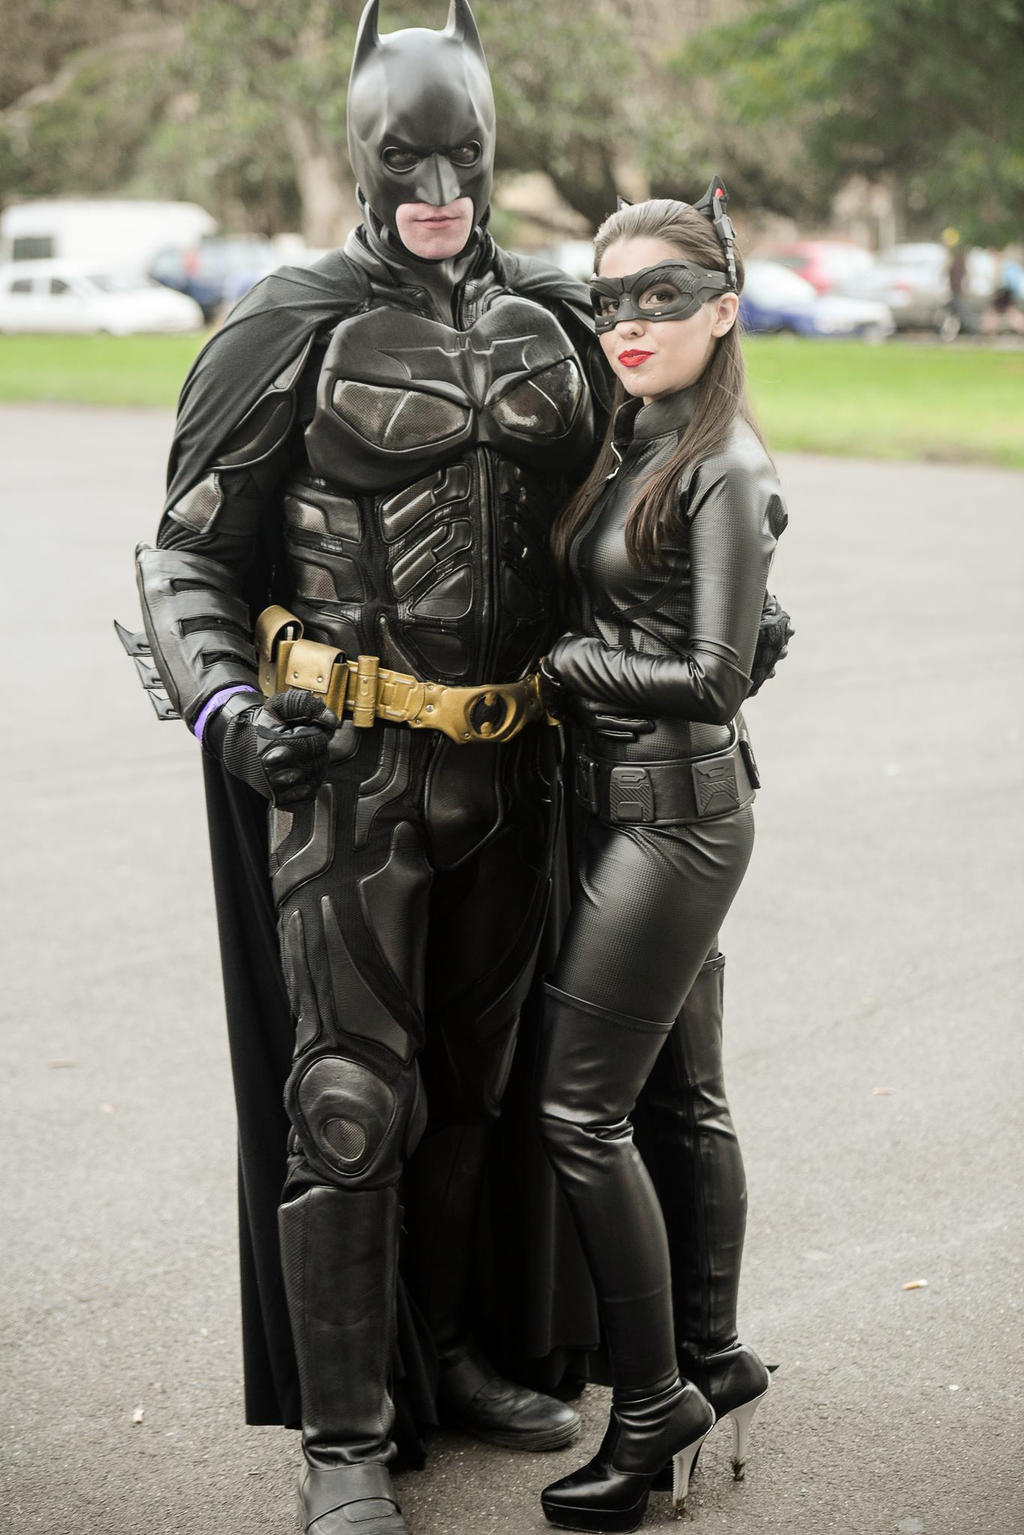 THE DARK KNIGHT RISES - Batman and Catwoman by Staceyleeh on DeviantArt